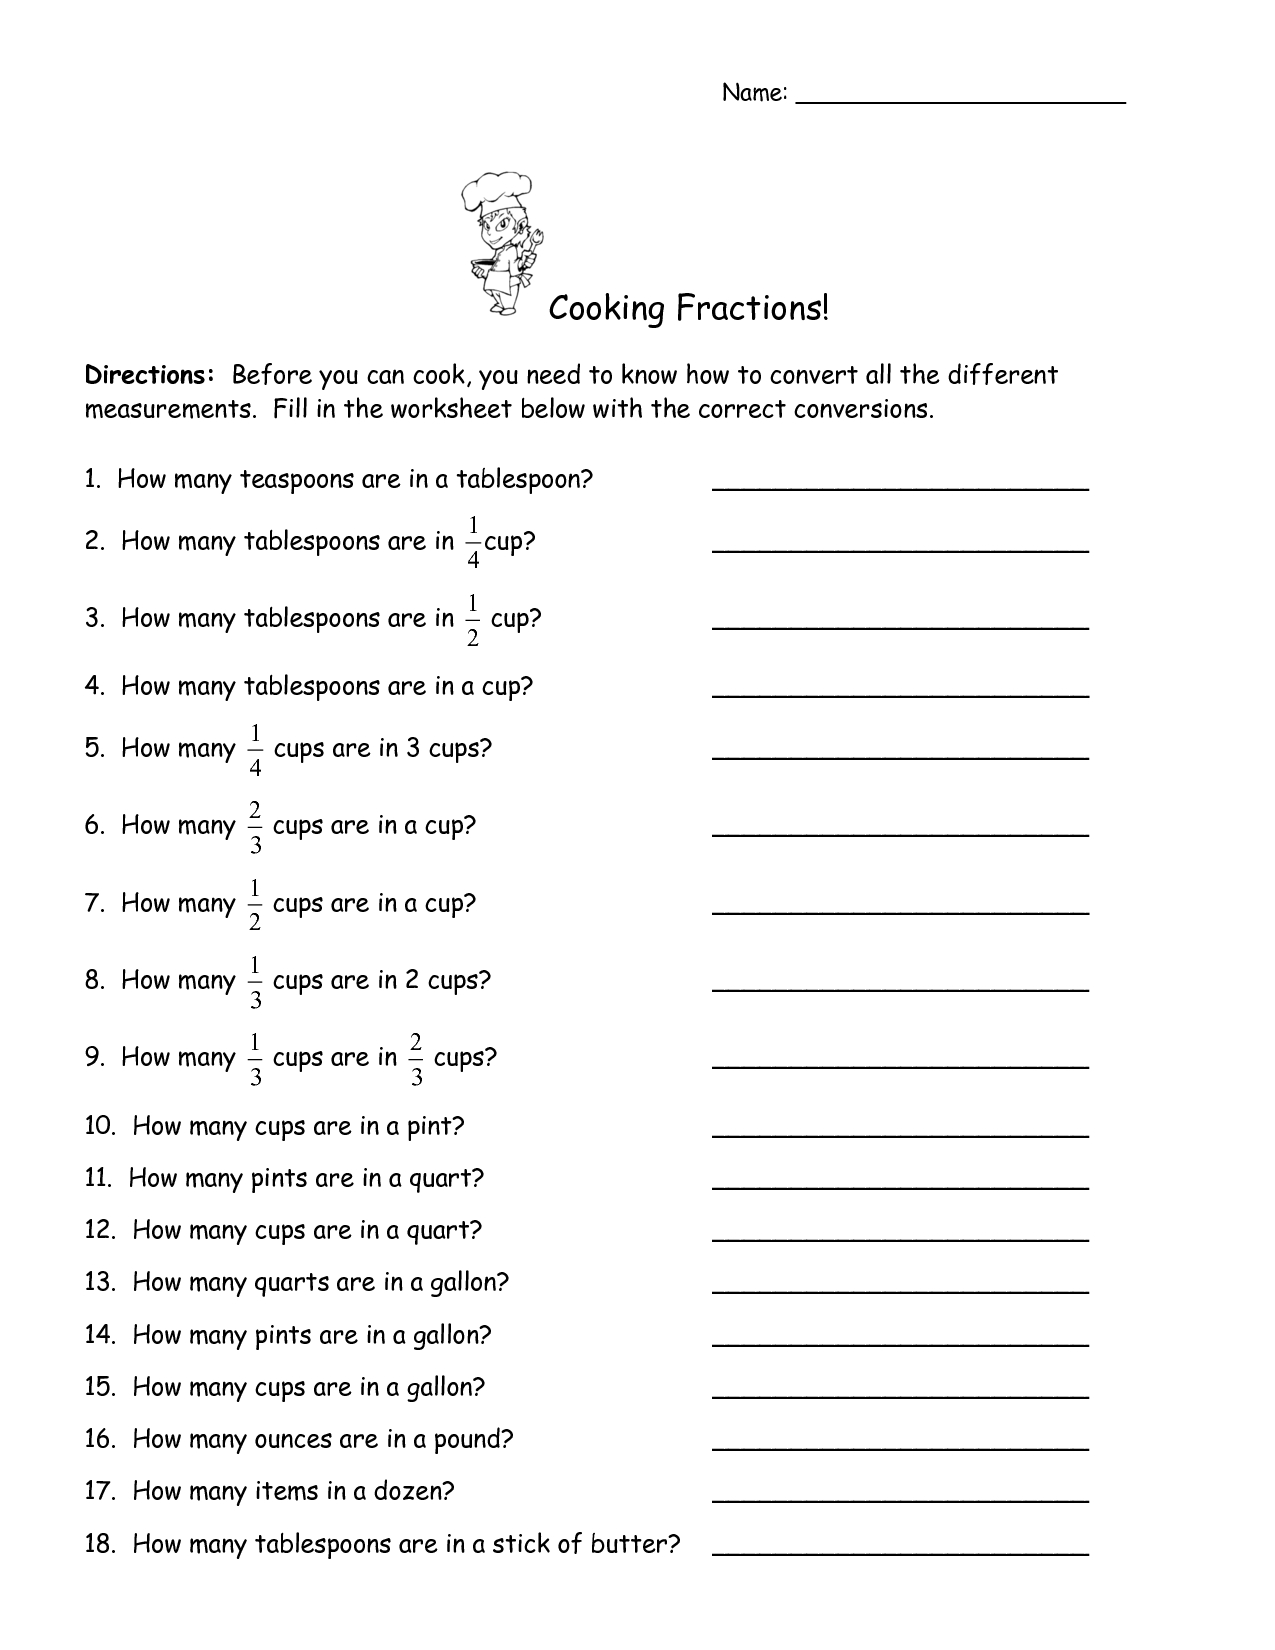 cooking-with-fractions-worksheet-db-excel